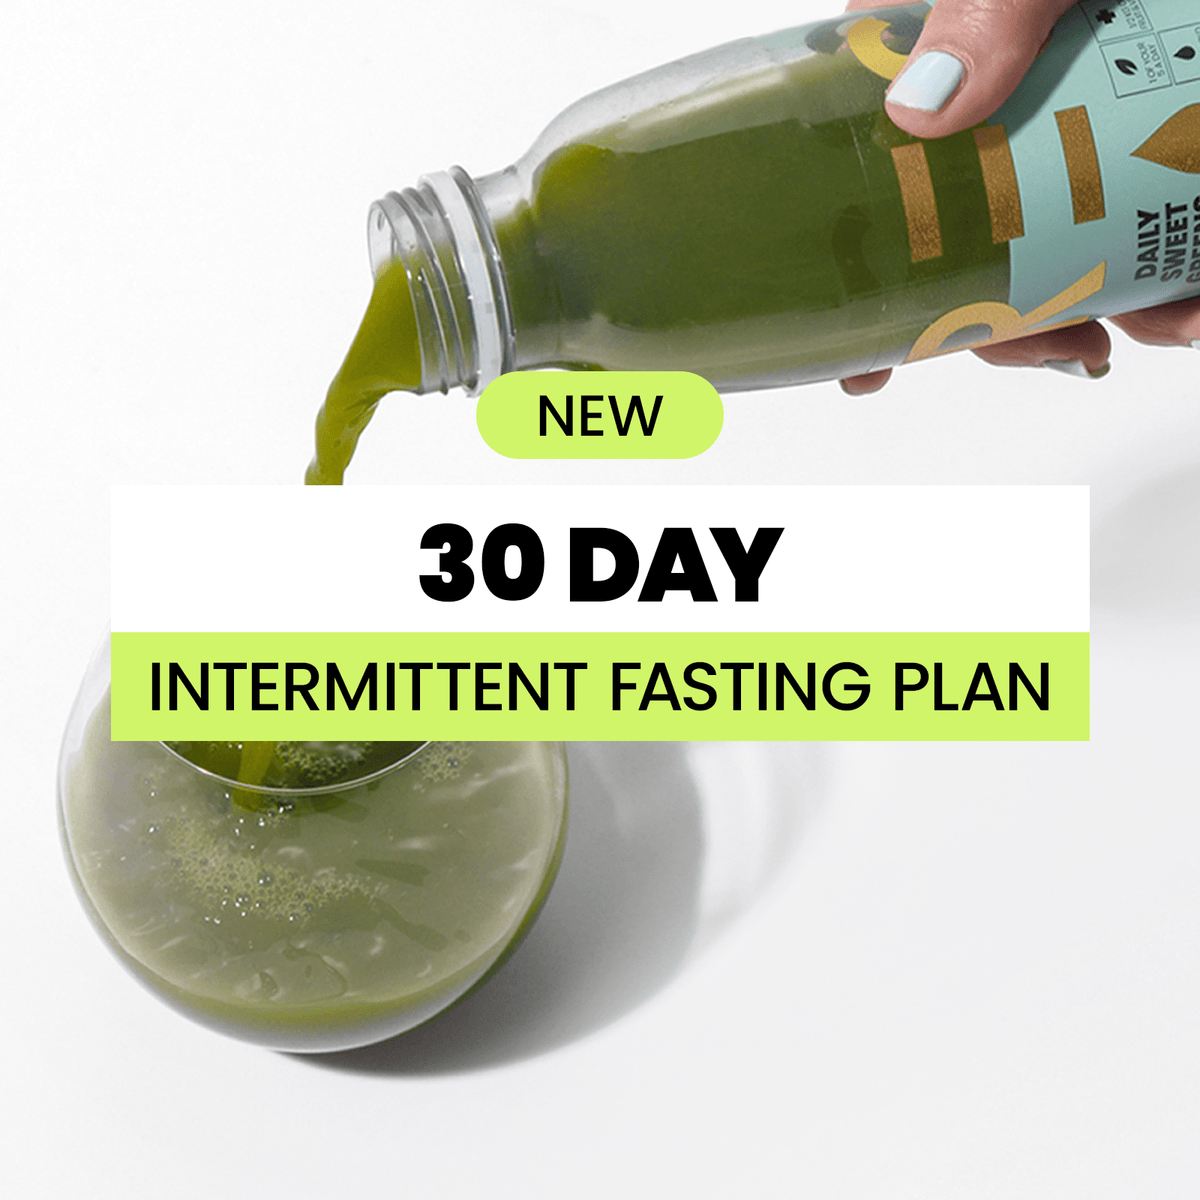 The 30 Day Intermittent Fasting Plan